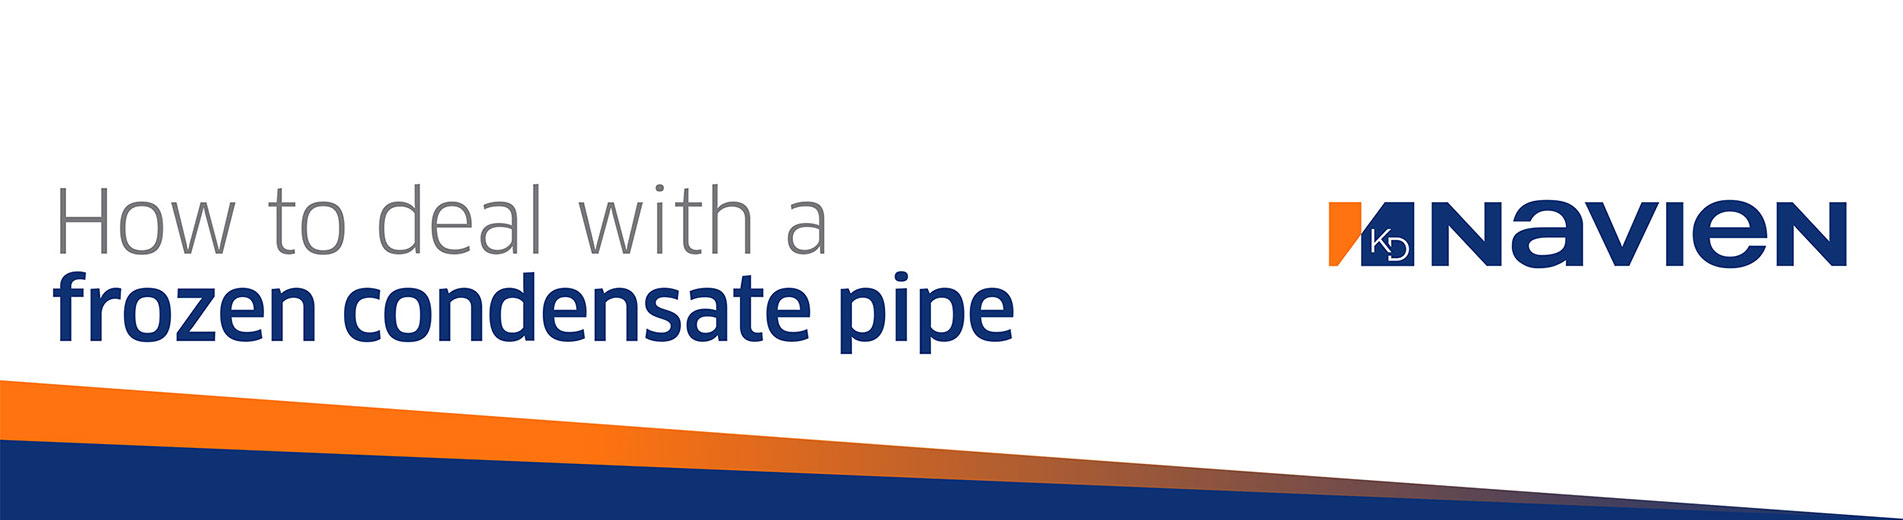 Navien - How to deal with a frozen condensate pipe blog banner